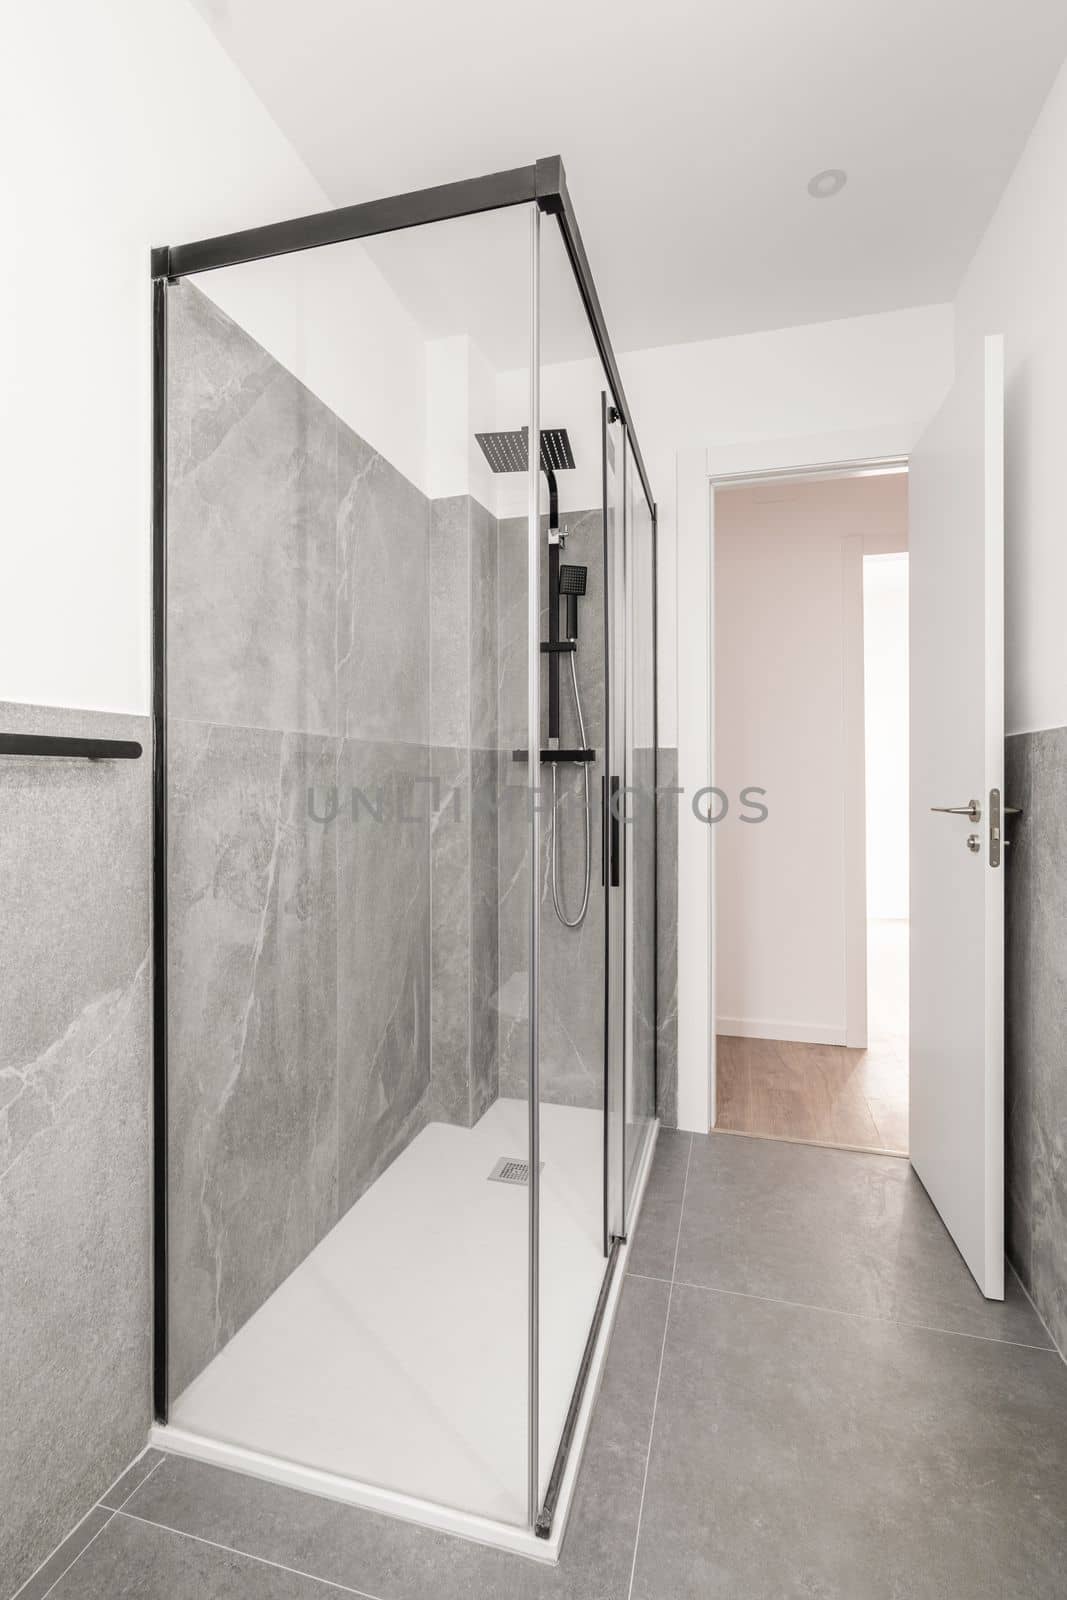 Bathroom with gray granite walls. The shower cabin is enclosed by glass transparent sliding doors in a black metal frame. Beautiful strict design is shown in accessories of black color. by apavlin